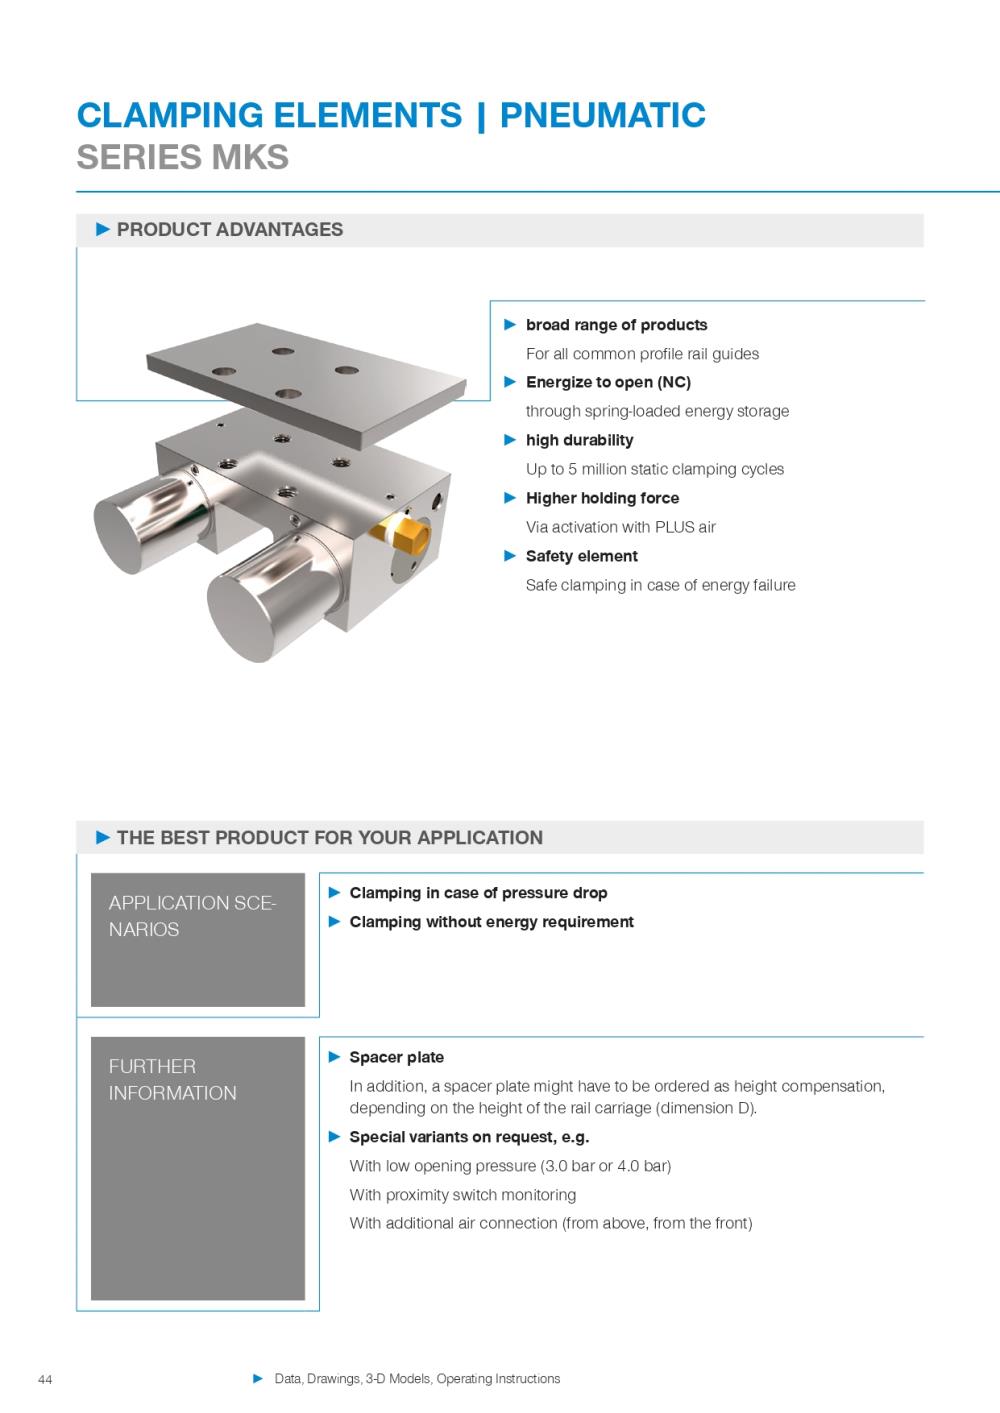  CLAMPING ELEMENTS | PNEUMATIC SERIES MKS